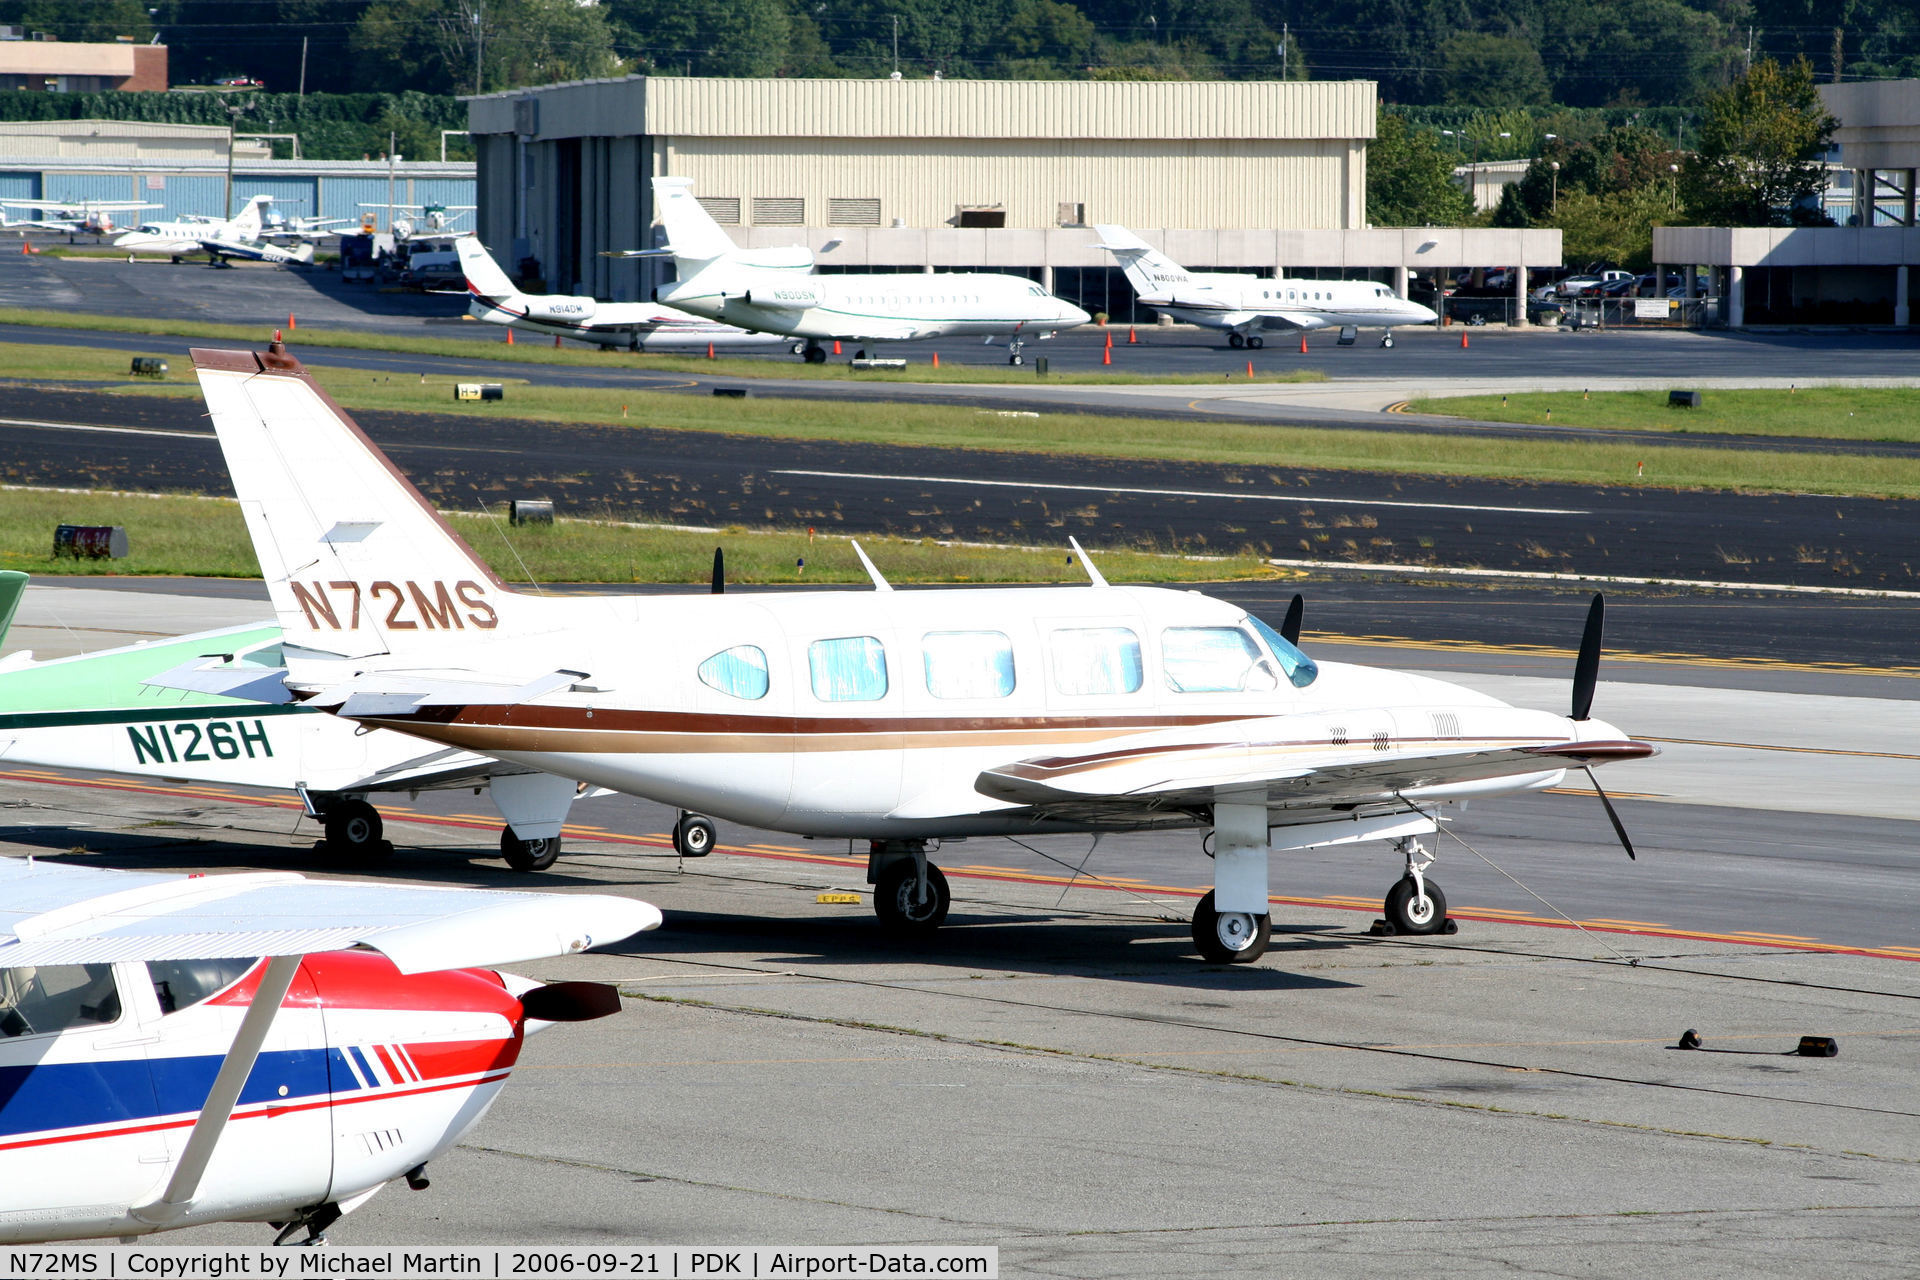 N72MS, 1971 Piper PA-31-310 Navajo C/N 31-755, Tied down @ Epps with other aircraft